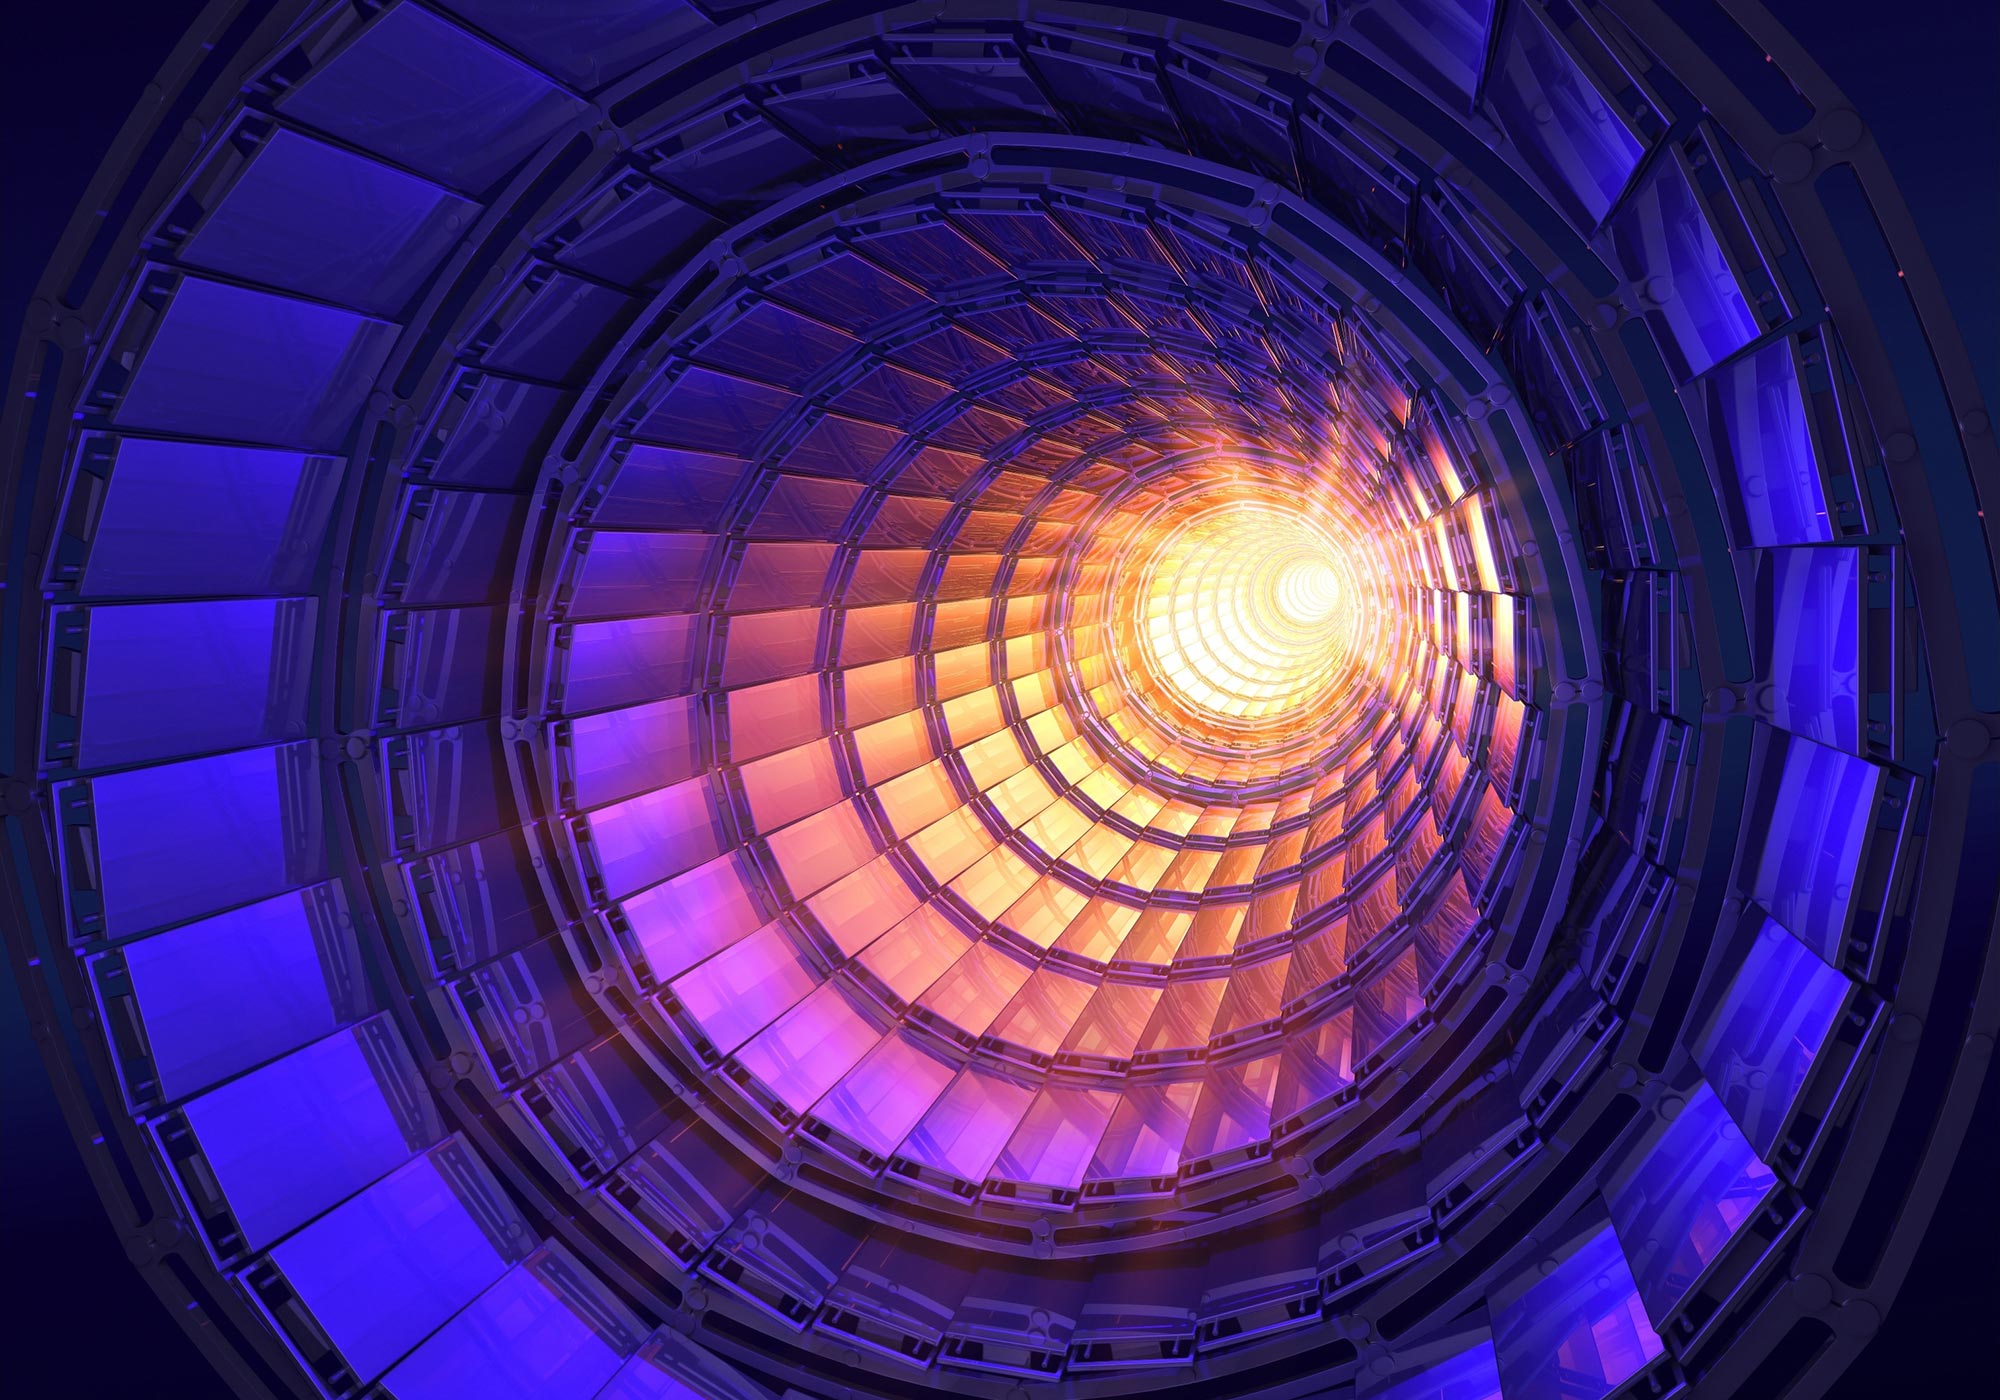 Large Hadron Collider Successfully Restarted at Record Energy: Revving Up the Search for Dark Matter - SciTechDaily : The Large Hadron Collider is once again delivering proton collisions to experiments, this time at an unprecedented energy of 13.6 TeV, marking the start of the accelerator’s third run of data taking for physics. A burst of applause erupted in the CERN Control…  | Tranquility 國際社群